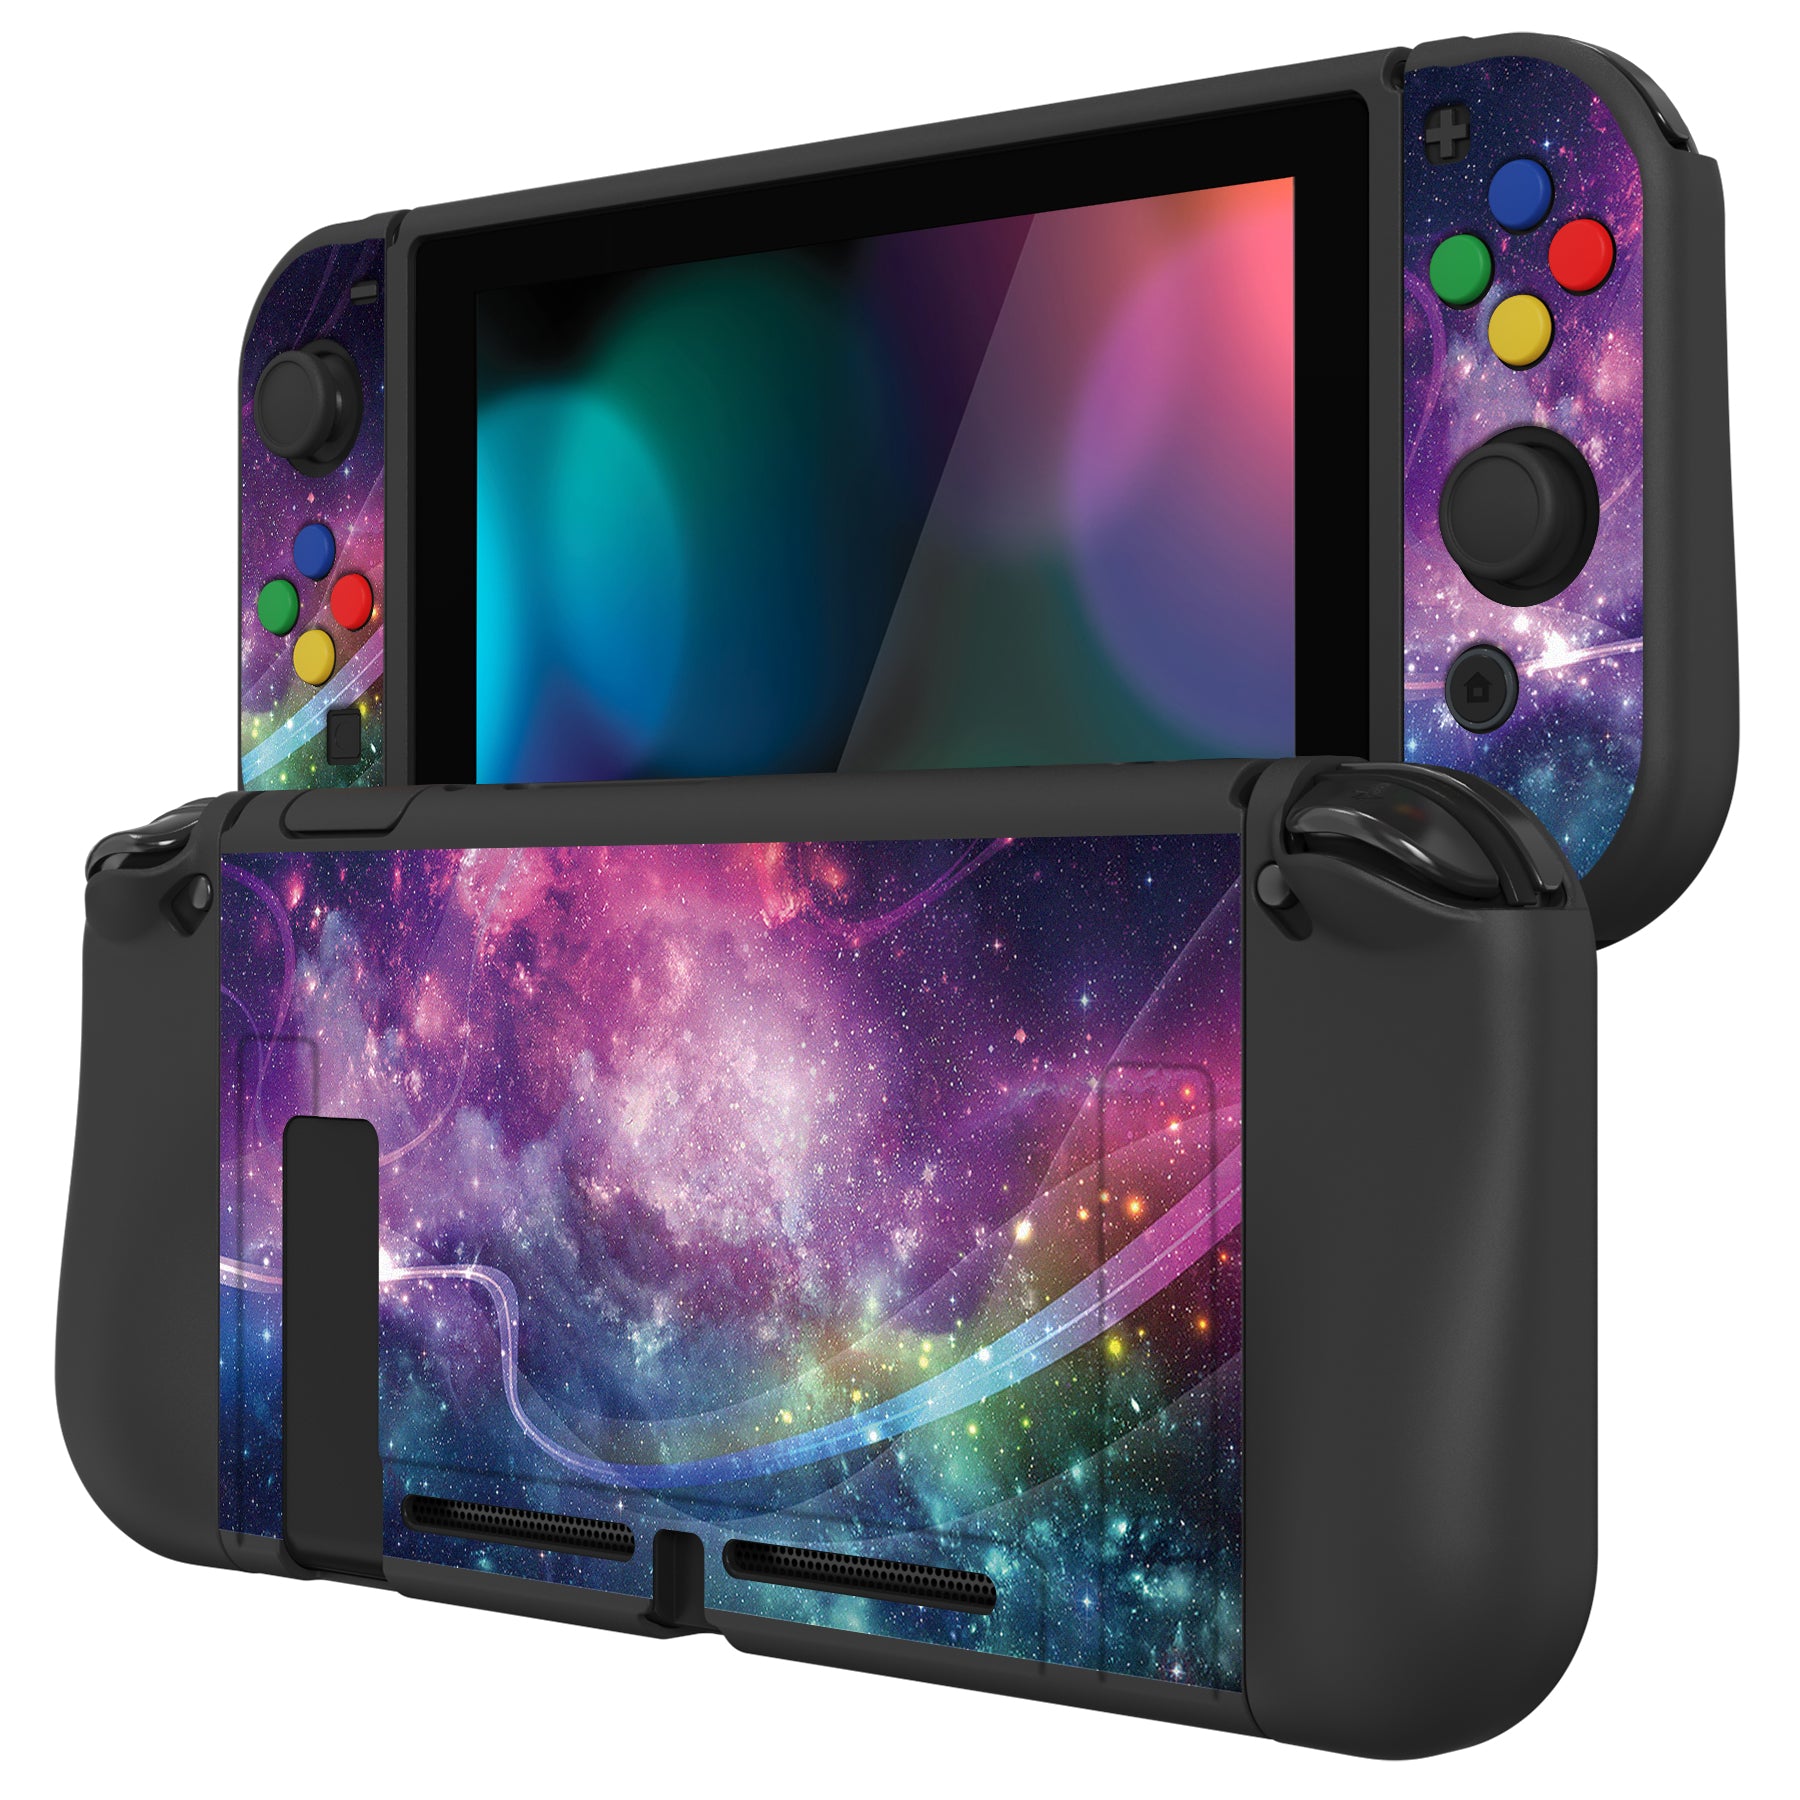 PlayVital ZealProtect Soft Protective Case for Nintendo Switch, Flexible Cover for Switch with Tempered Glass Screen Protector & Thumb Grips & ABXY Direction Button Caps - Purple Galaxy - RNSYV6001 playvital